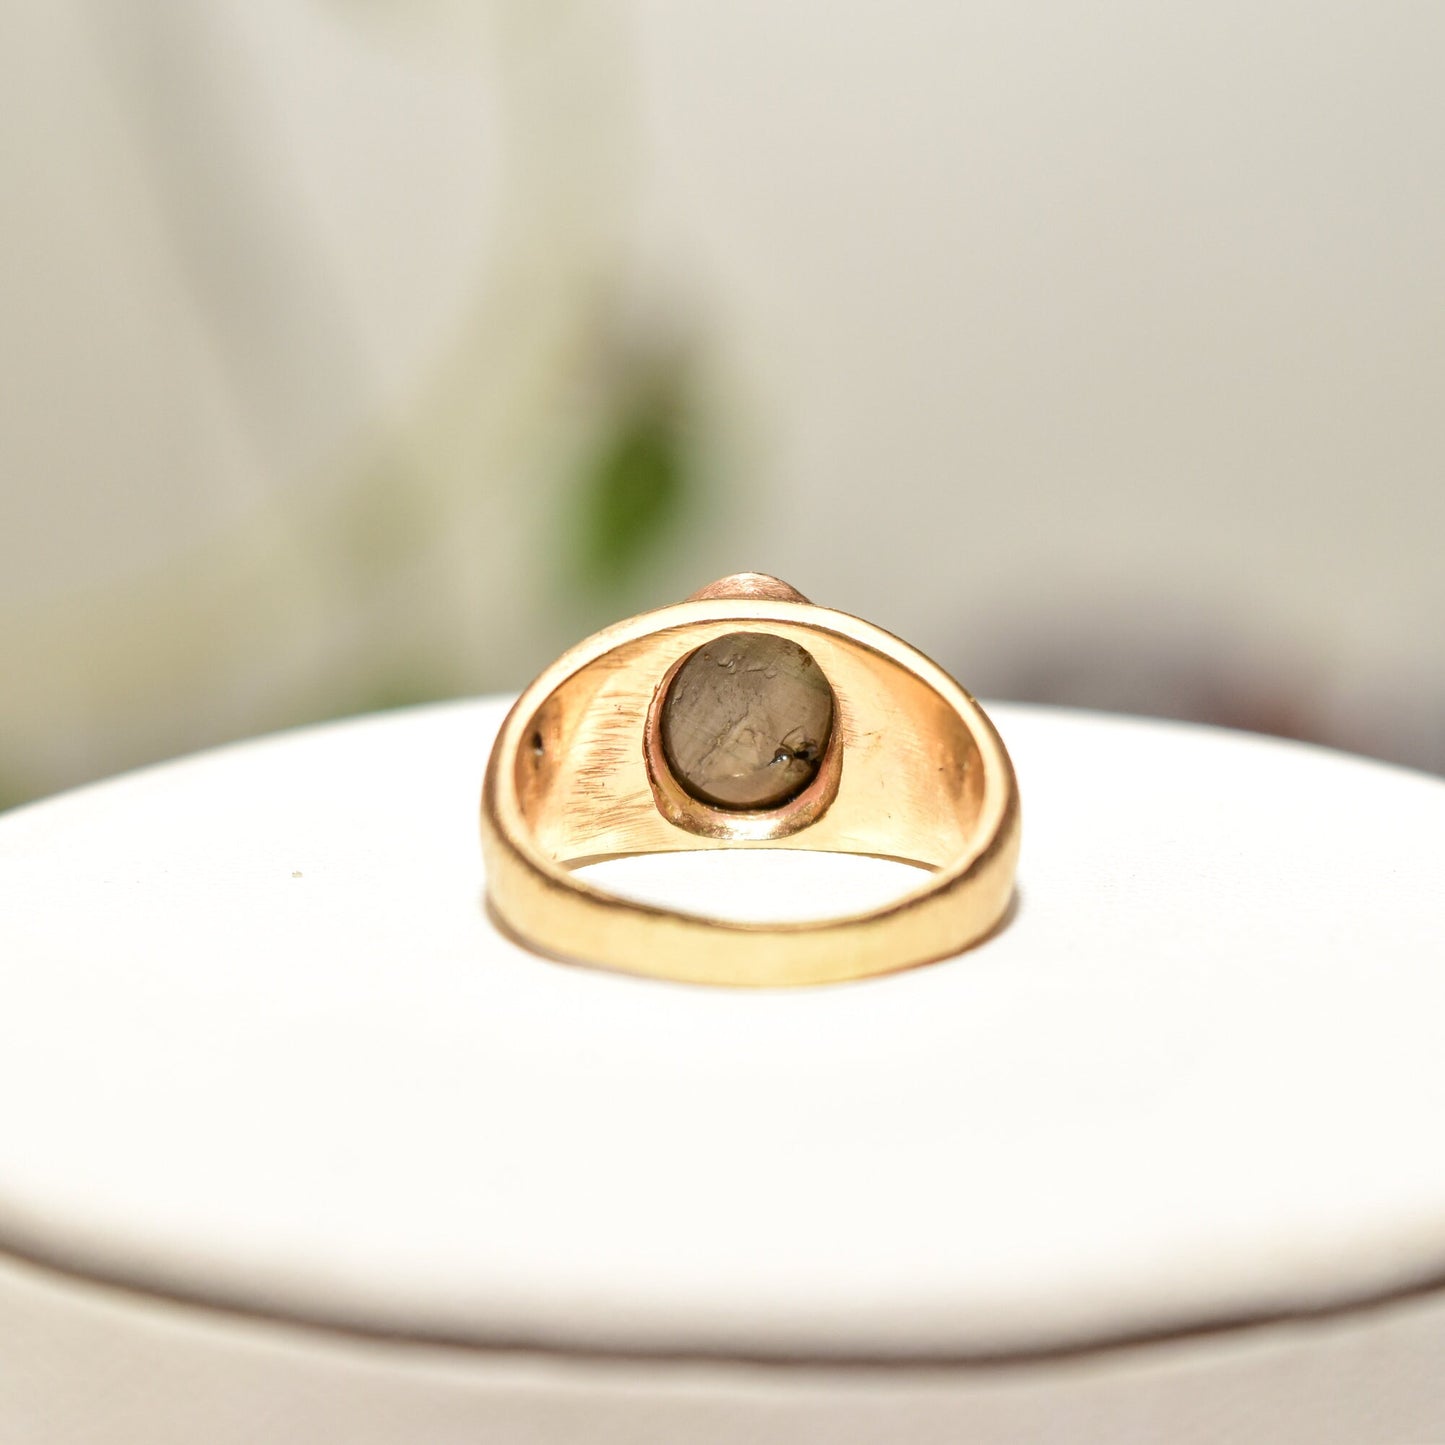 14K yellow gold men's pinky ring featuring a round black star sapphire gemstone displayed on a white background, estate jewelry piece, size 8 3/4 US.